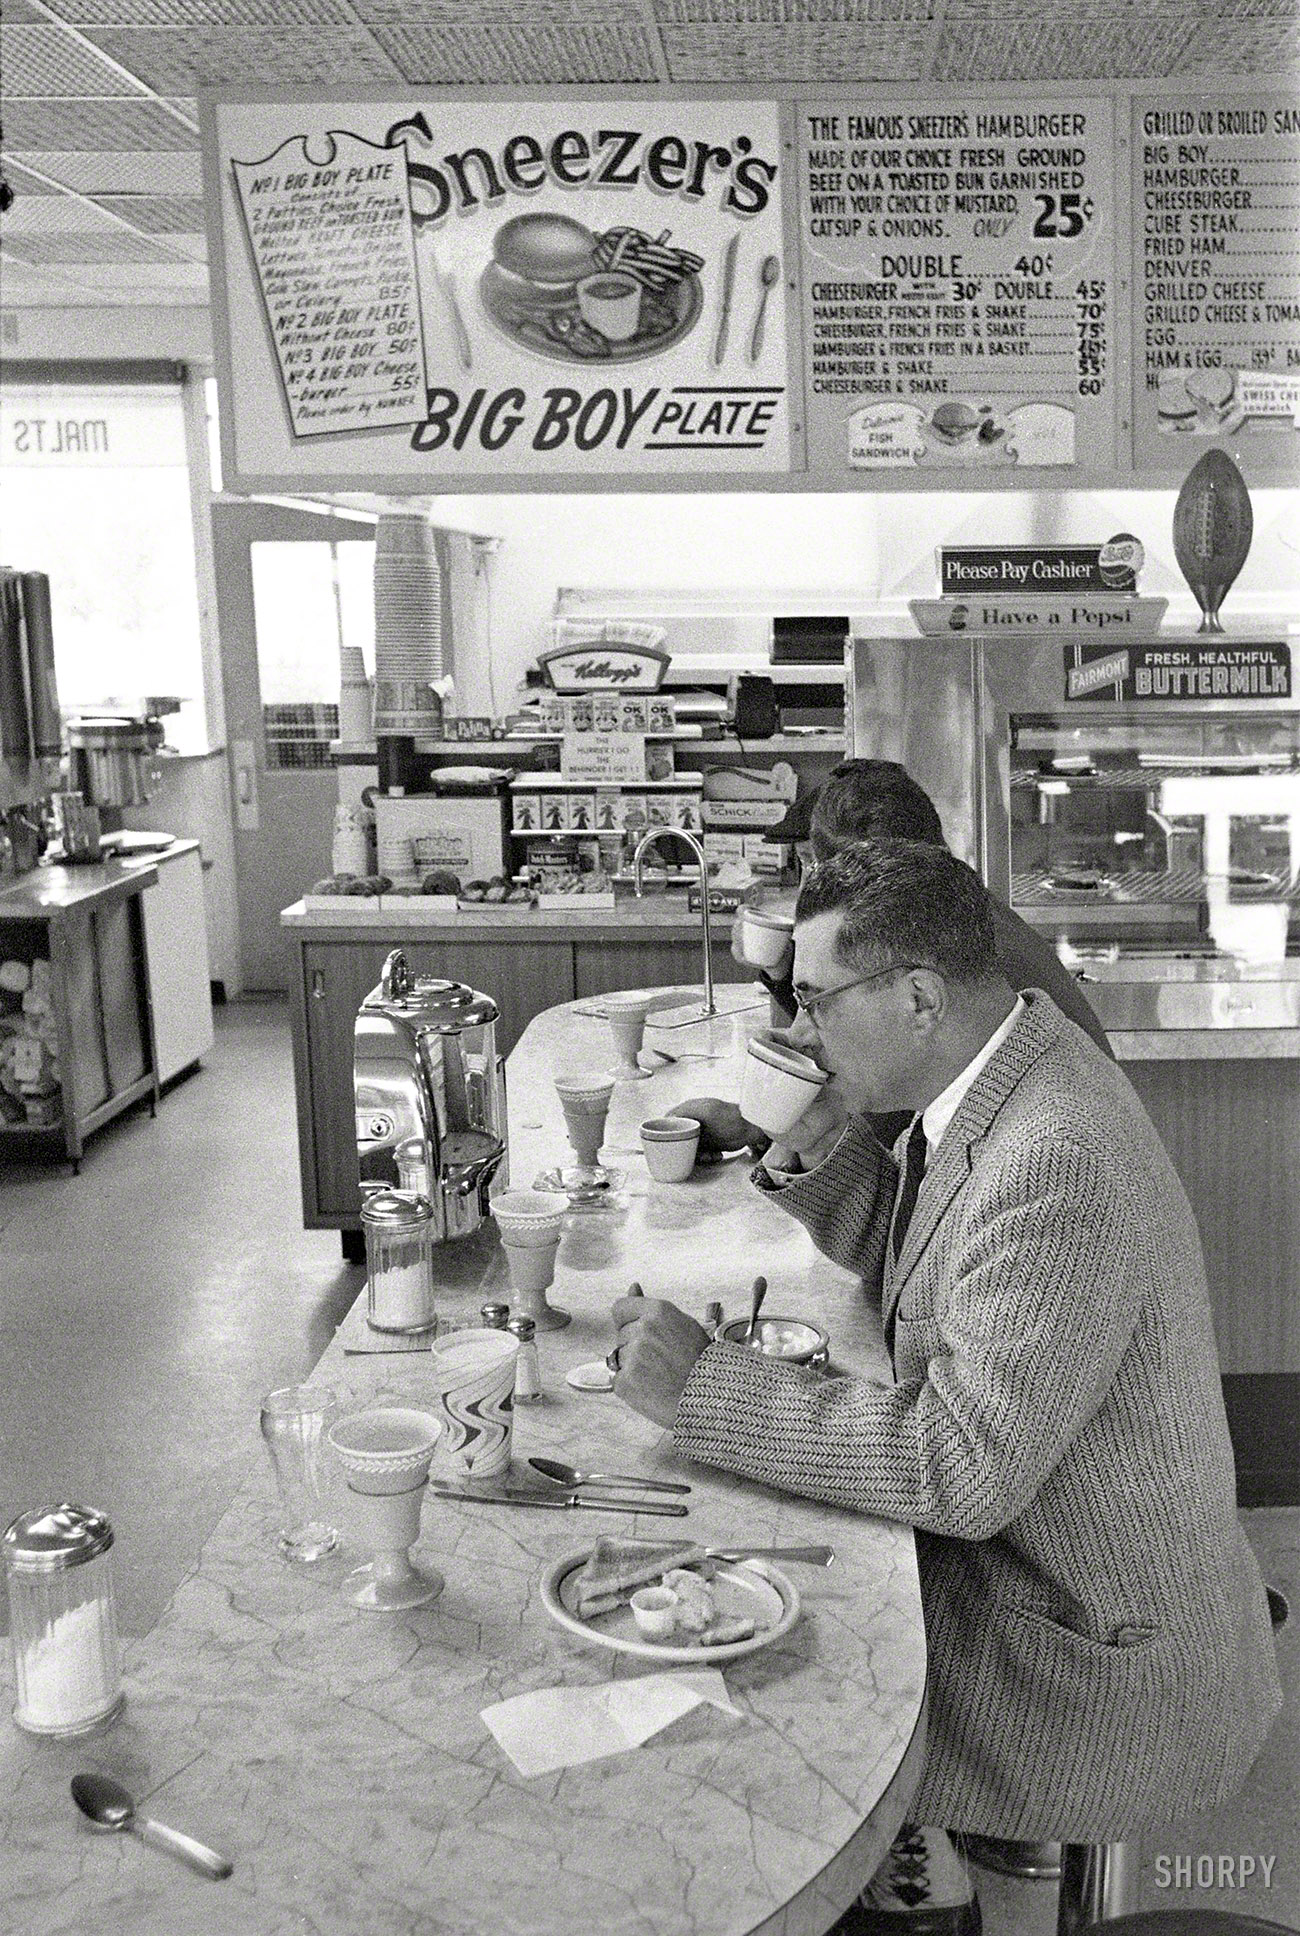 1960. Green Bay, Wisconsin. "Packers coach Vince Lombardi at lunch counter." Sneezer's No. 2 -- could anything sound more appetizing? Photo by Frank Bauman for the Look magazine assignment "The Packers Pay the Price." View full size.